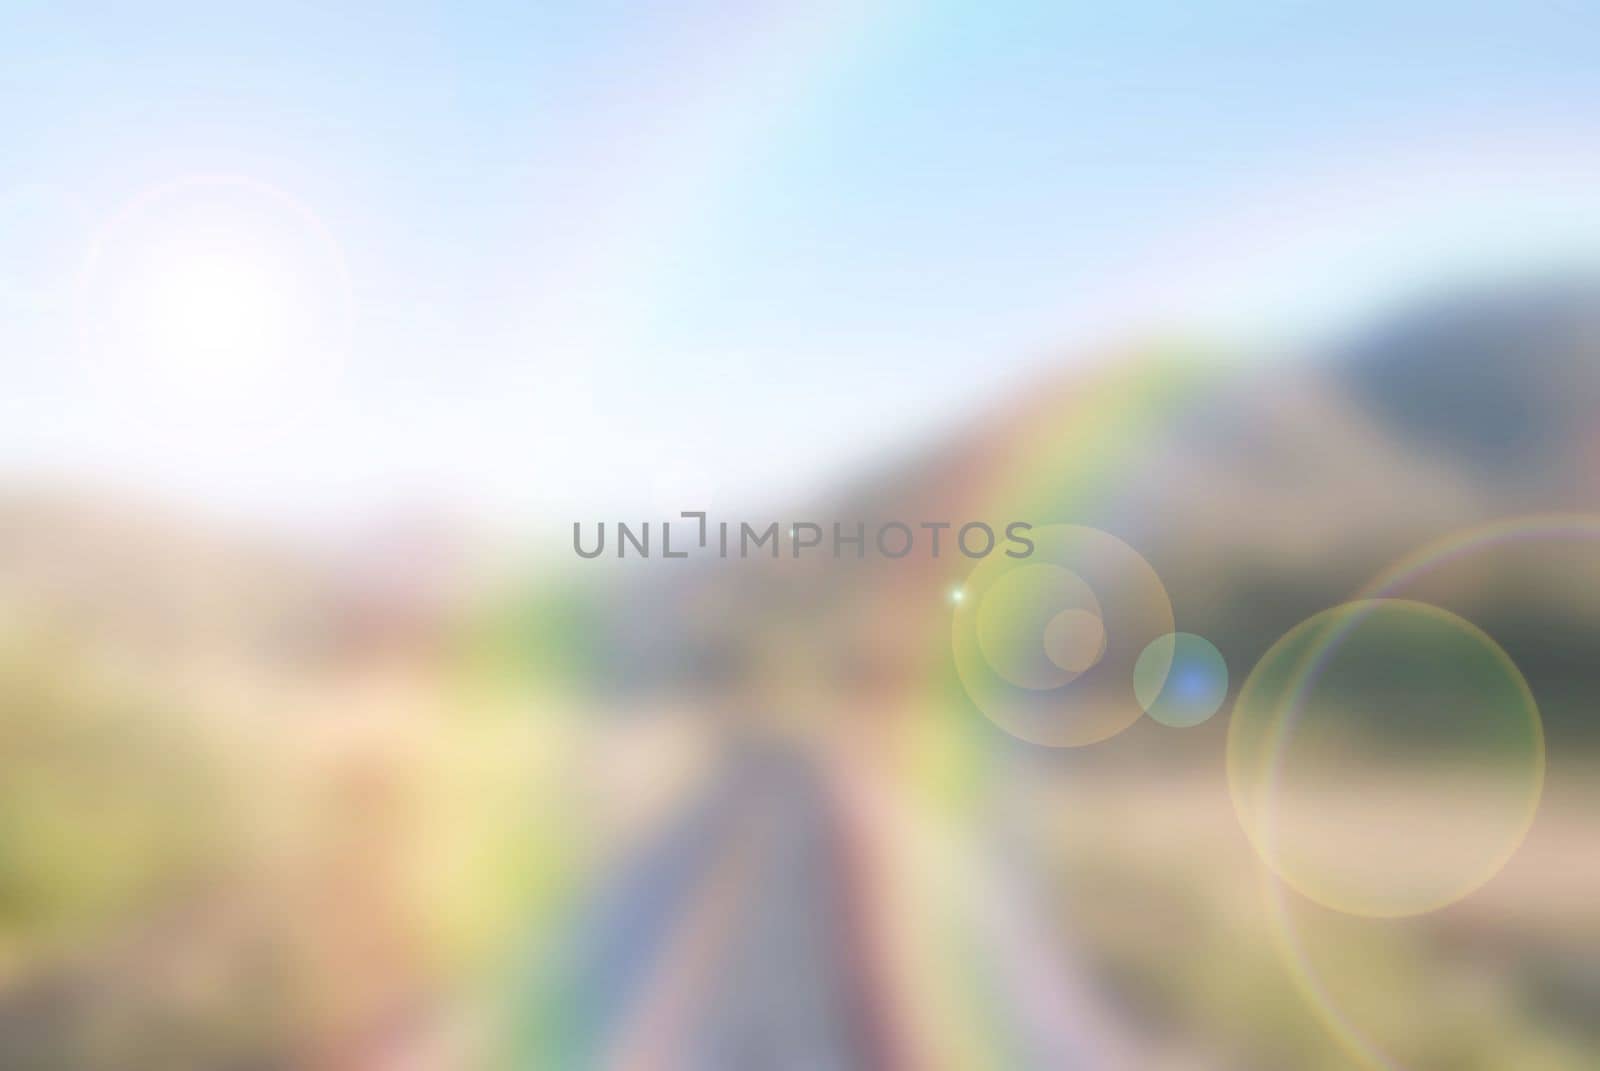 abstract blurred background with rainbow